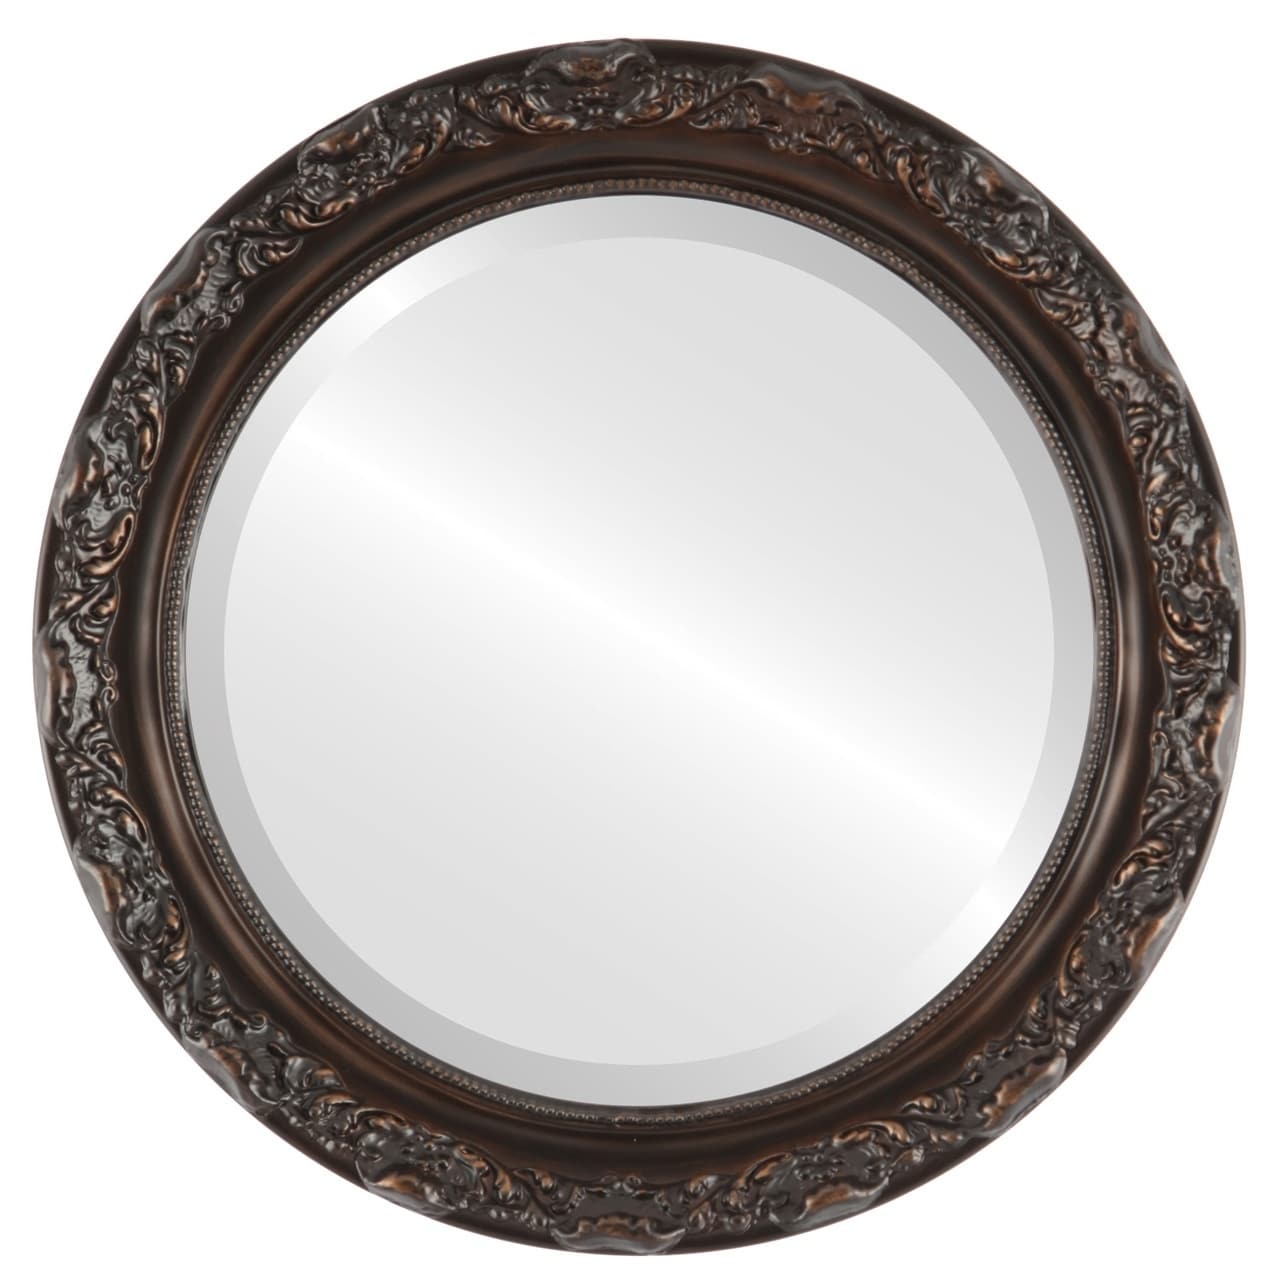 OVALCREST by The OVALCREST Mirror Store Rome Framed Round Mirror in Rubbed  Bronze Antique Bronze 21x21